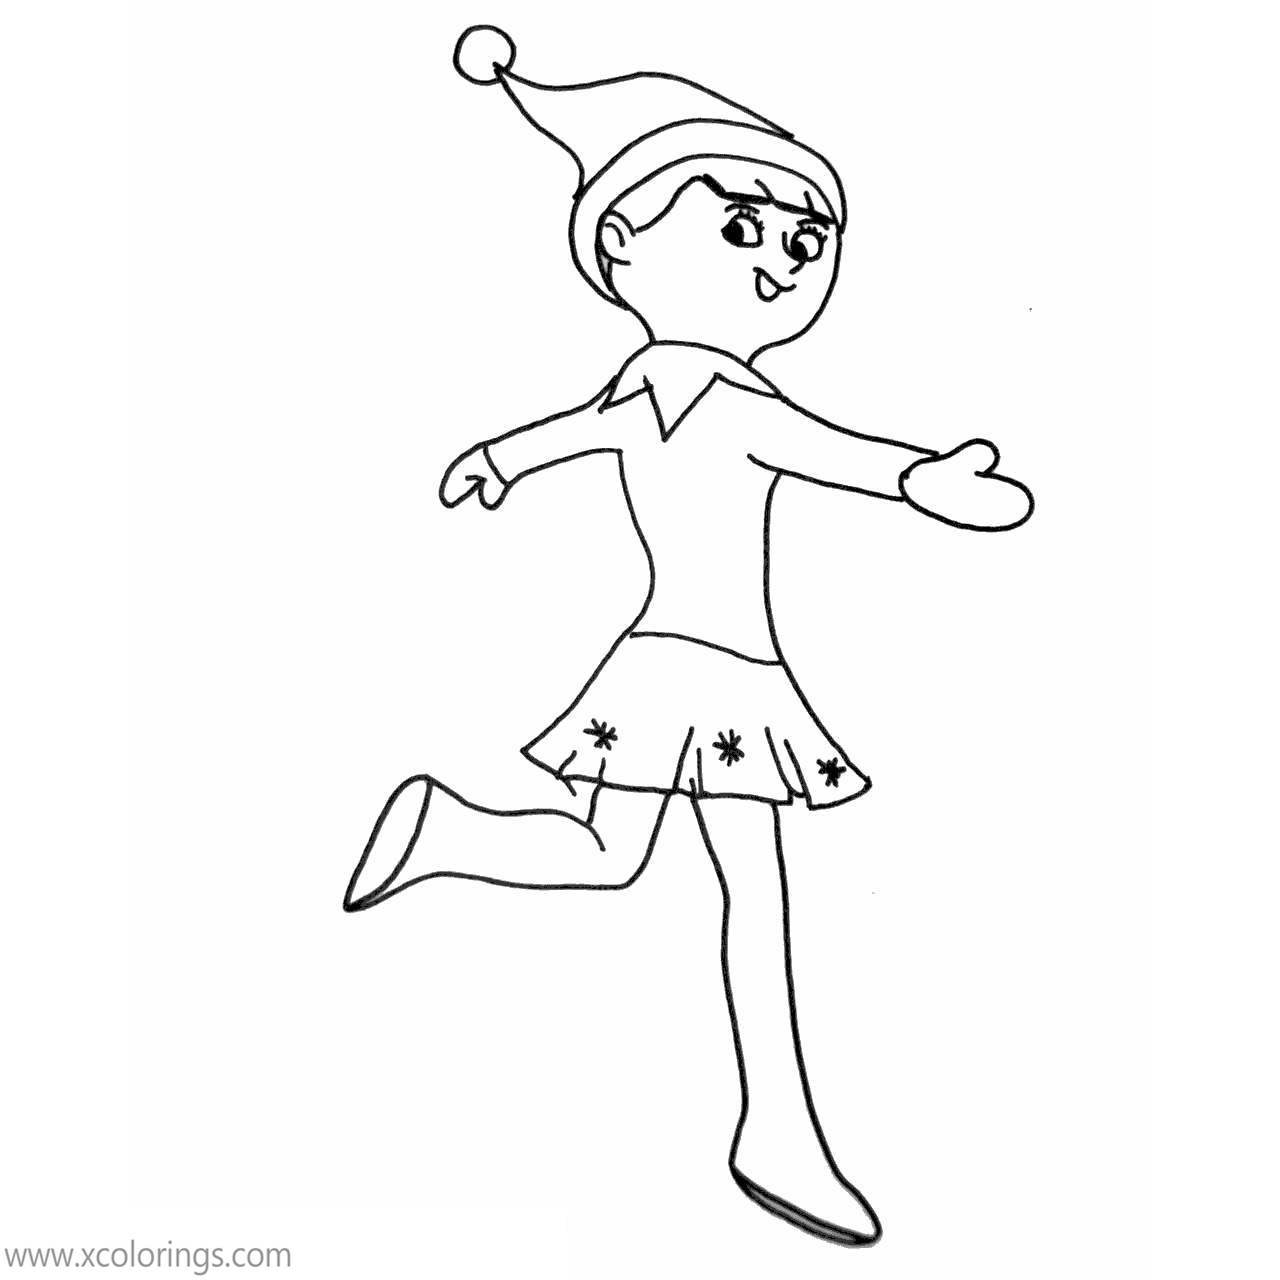 Free Elf On The Shelf Coloring Pages Snowflake is Dancing printable